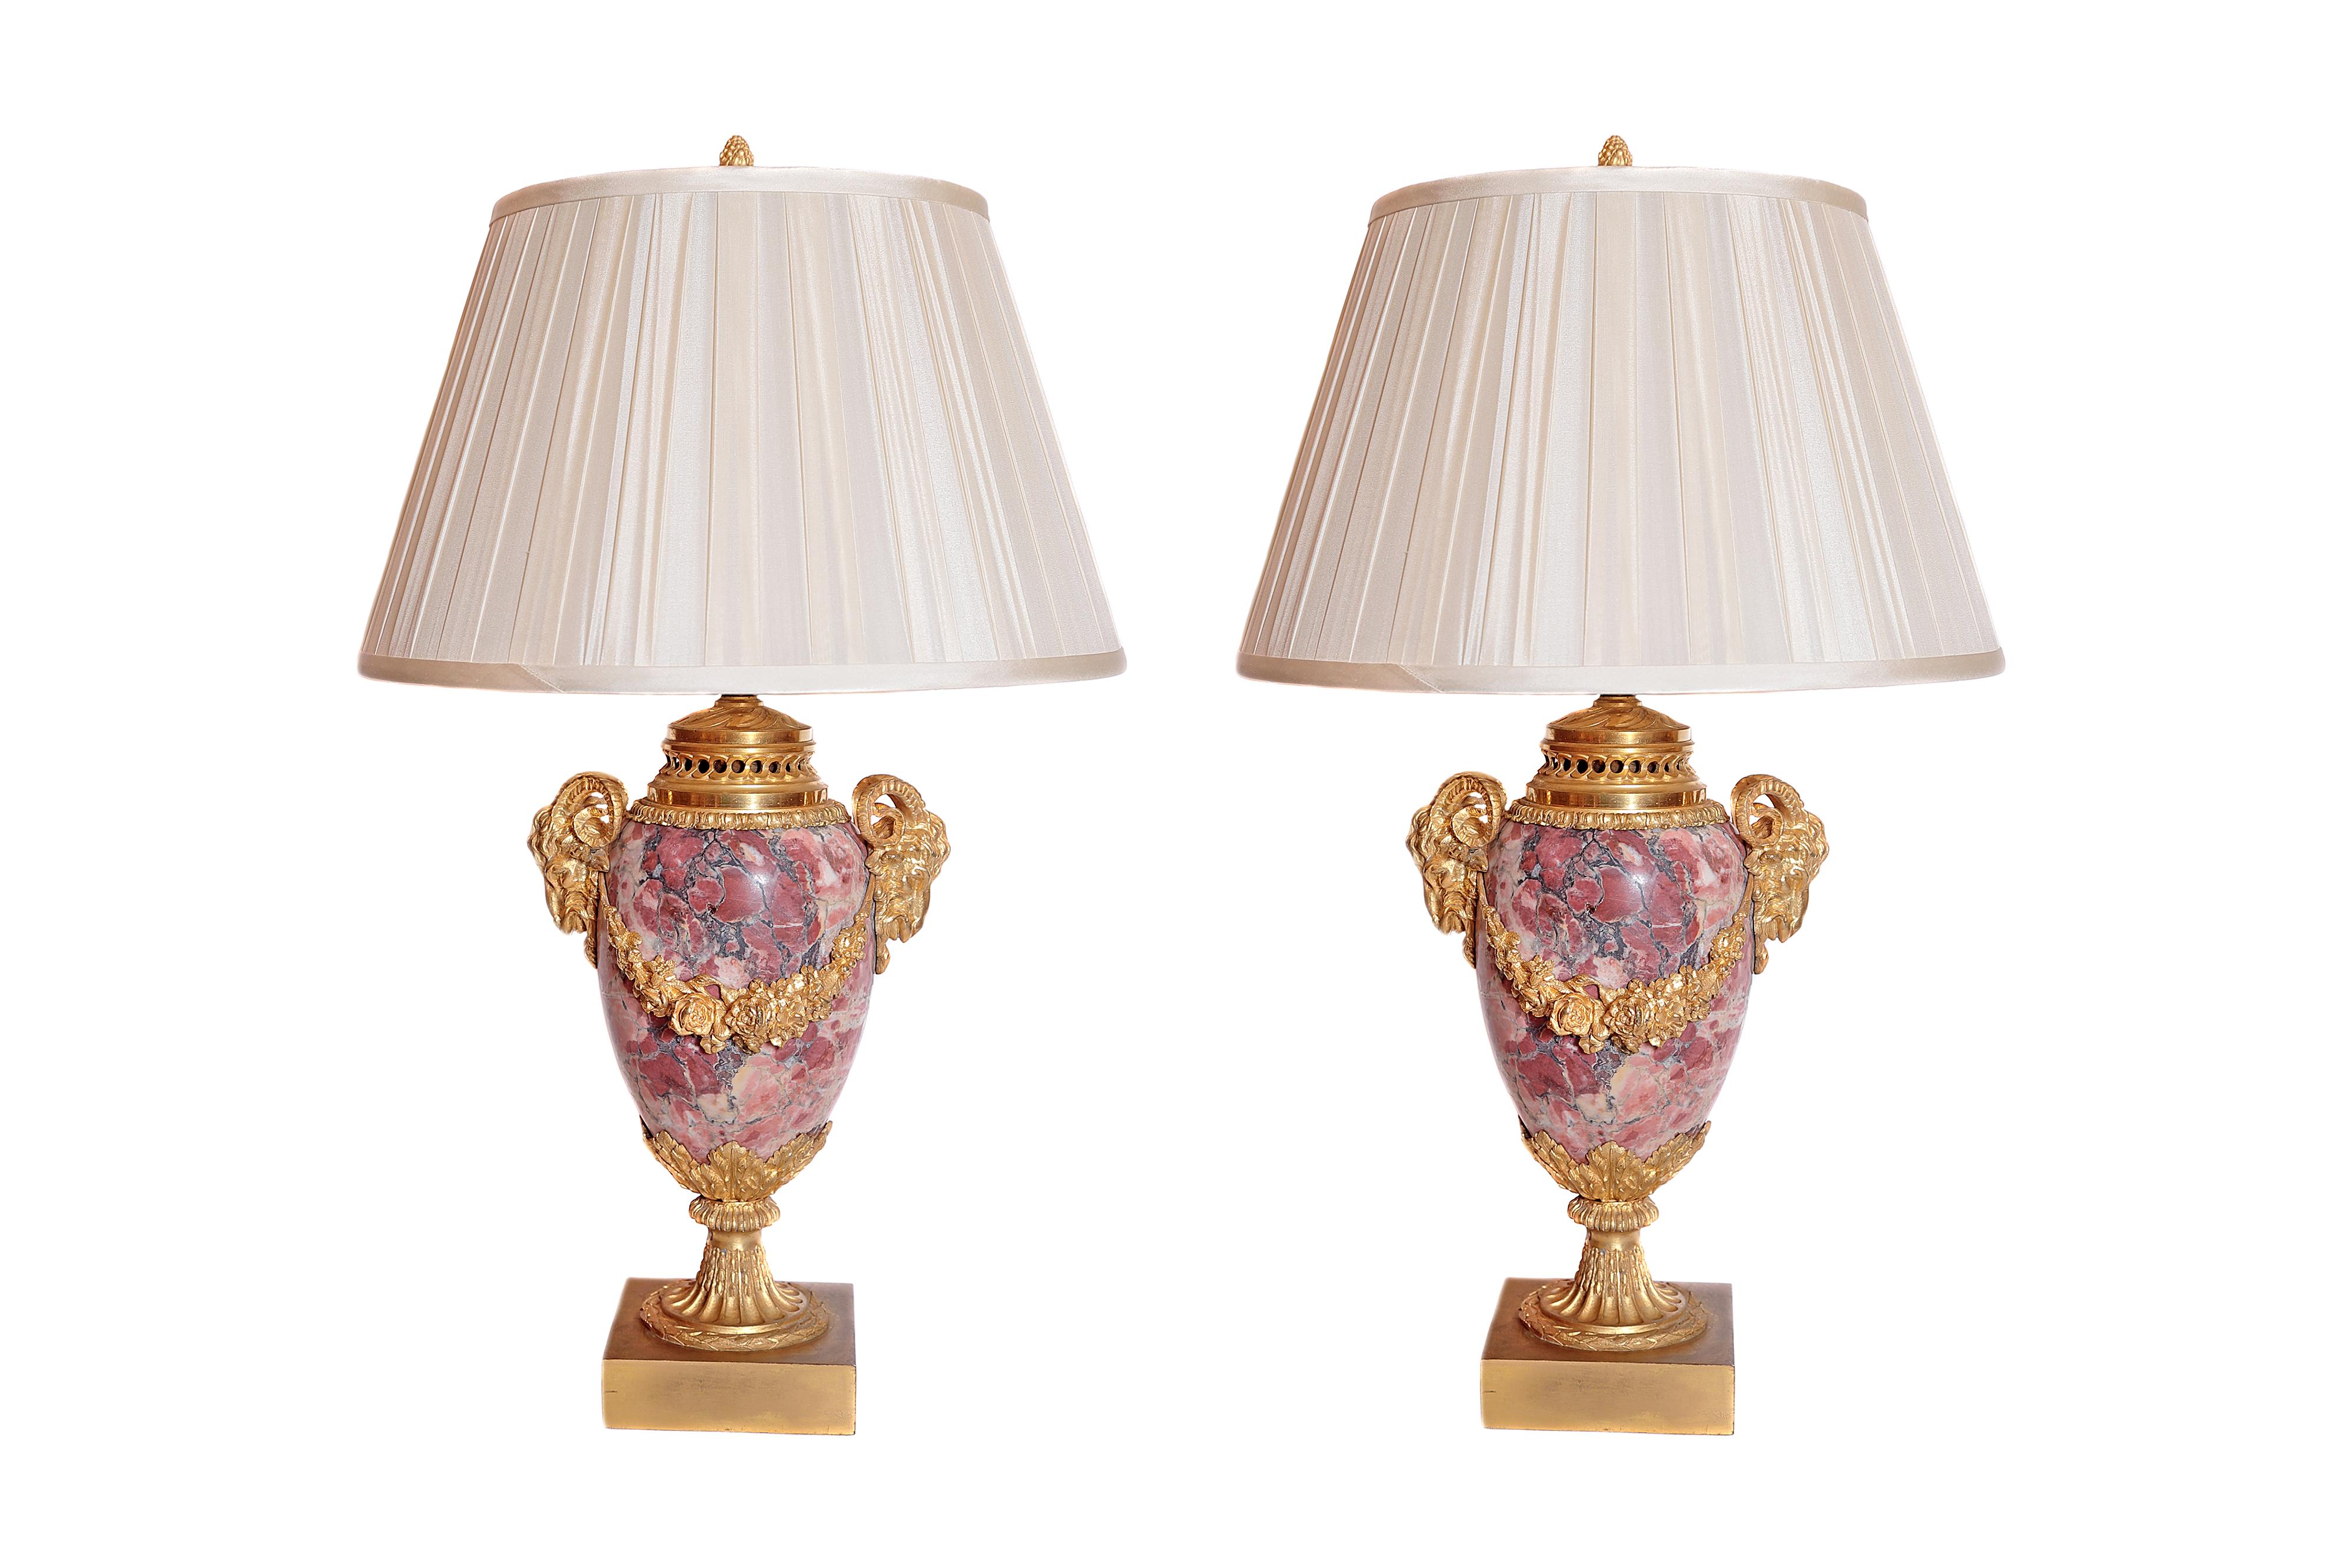 A fine pair of 19th century French gilt bronze and breche Violette marble urn lamps. Ram's head details.